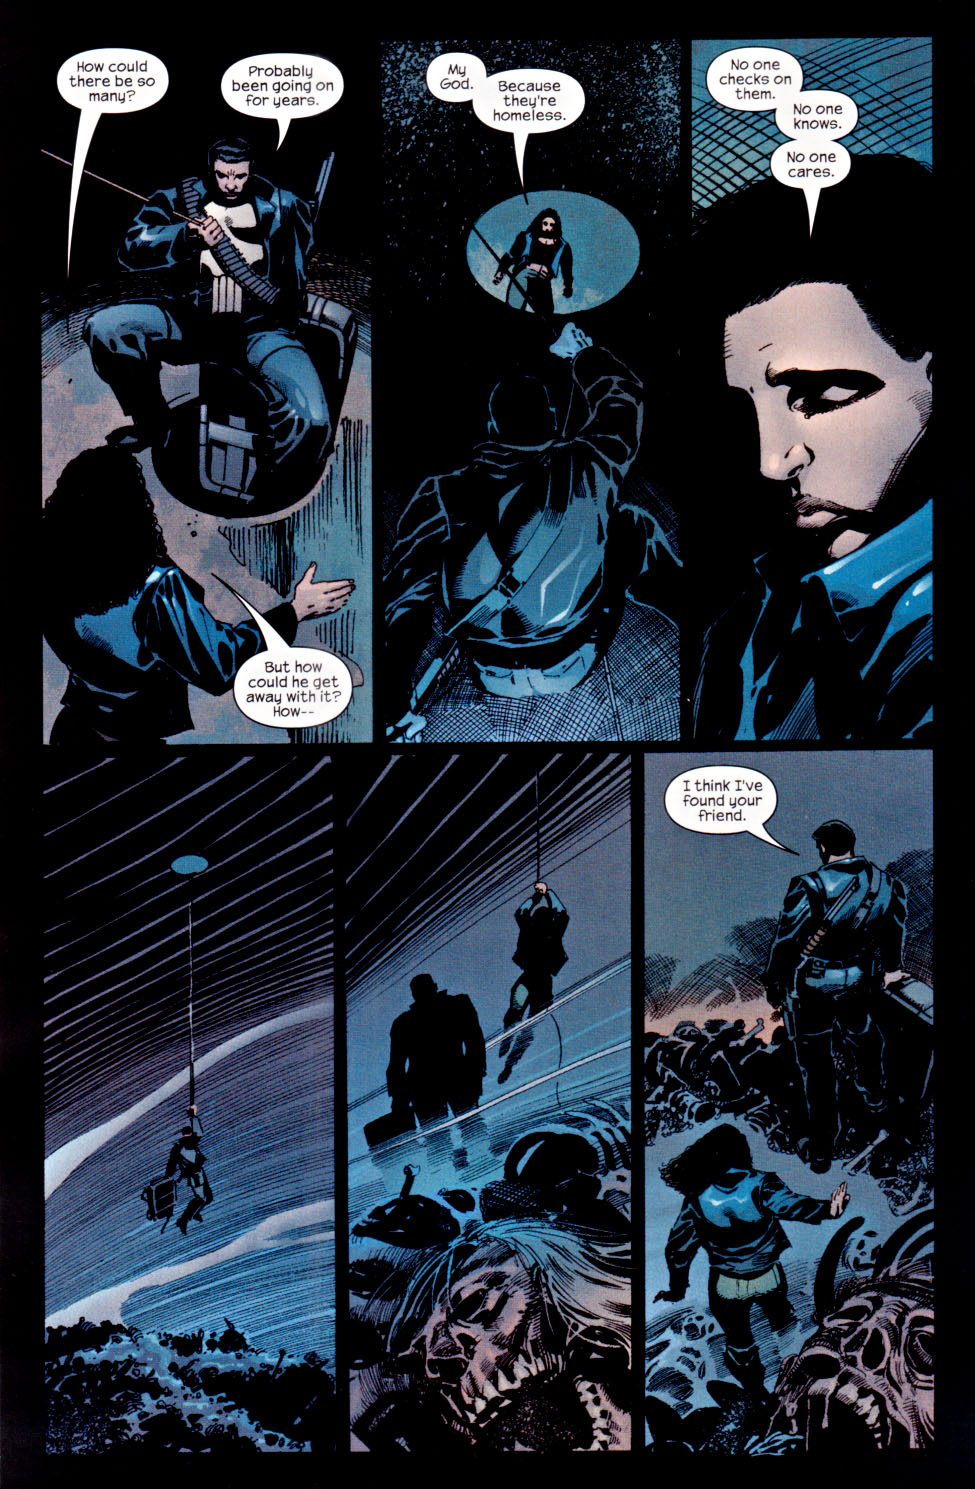 The Punisher (2001) issue 26 - Hidden #03 - Page 11